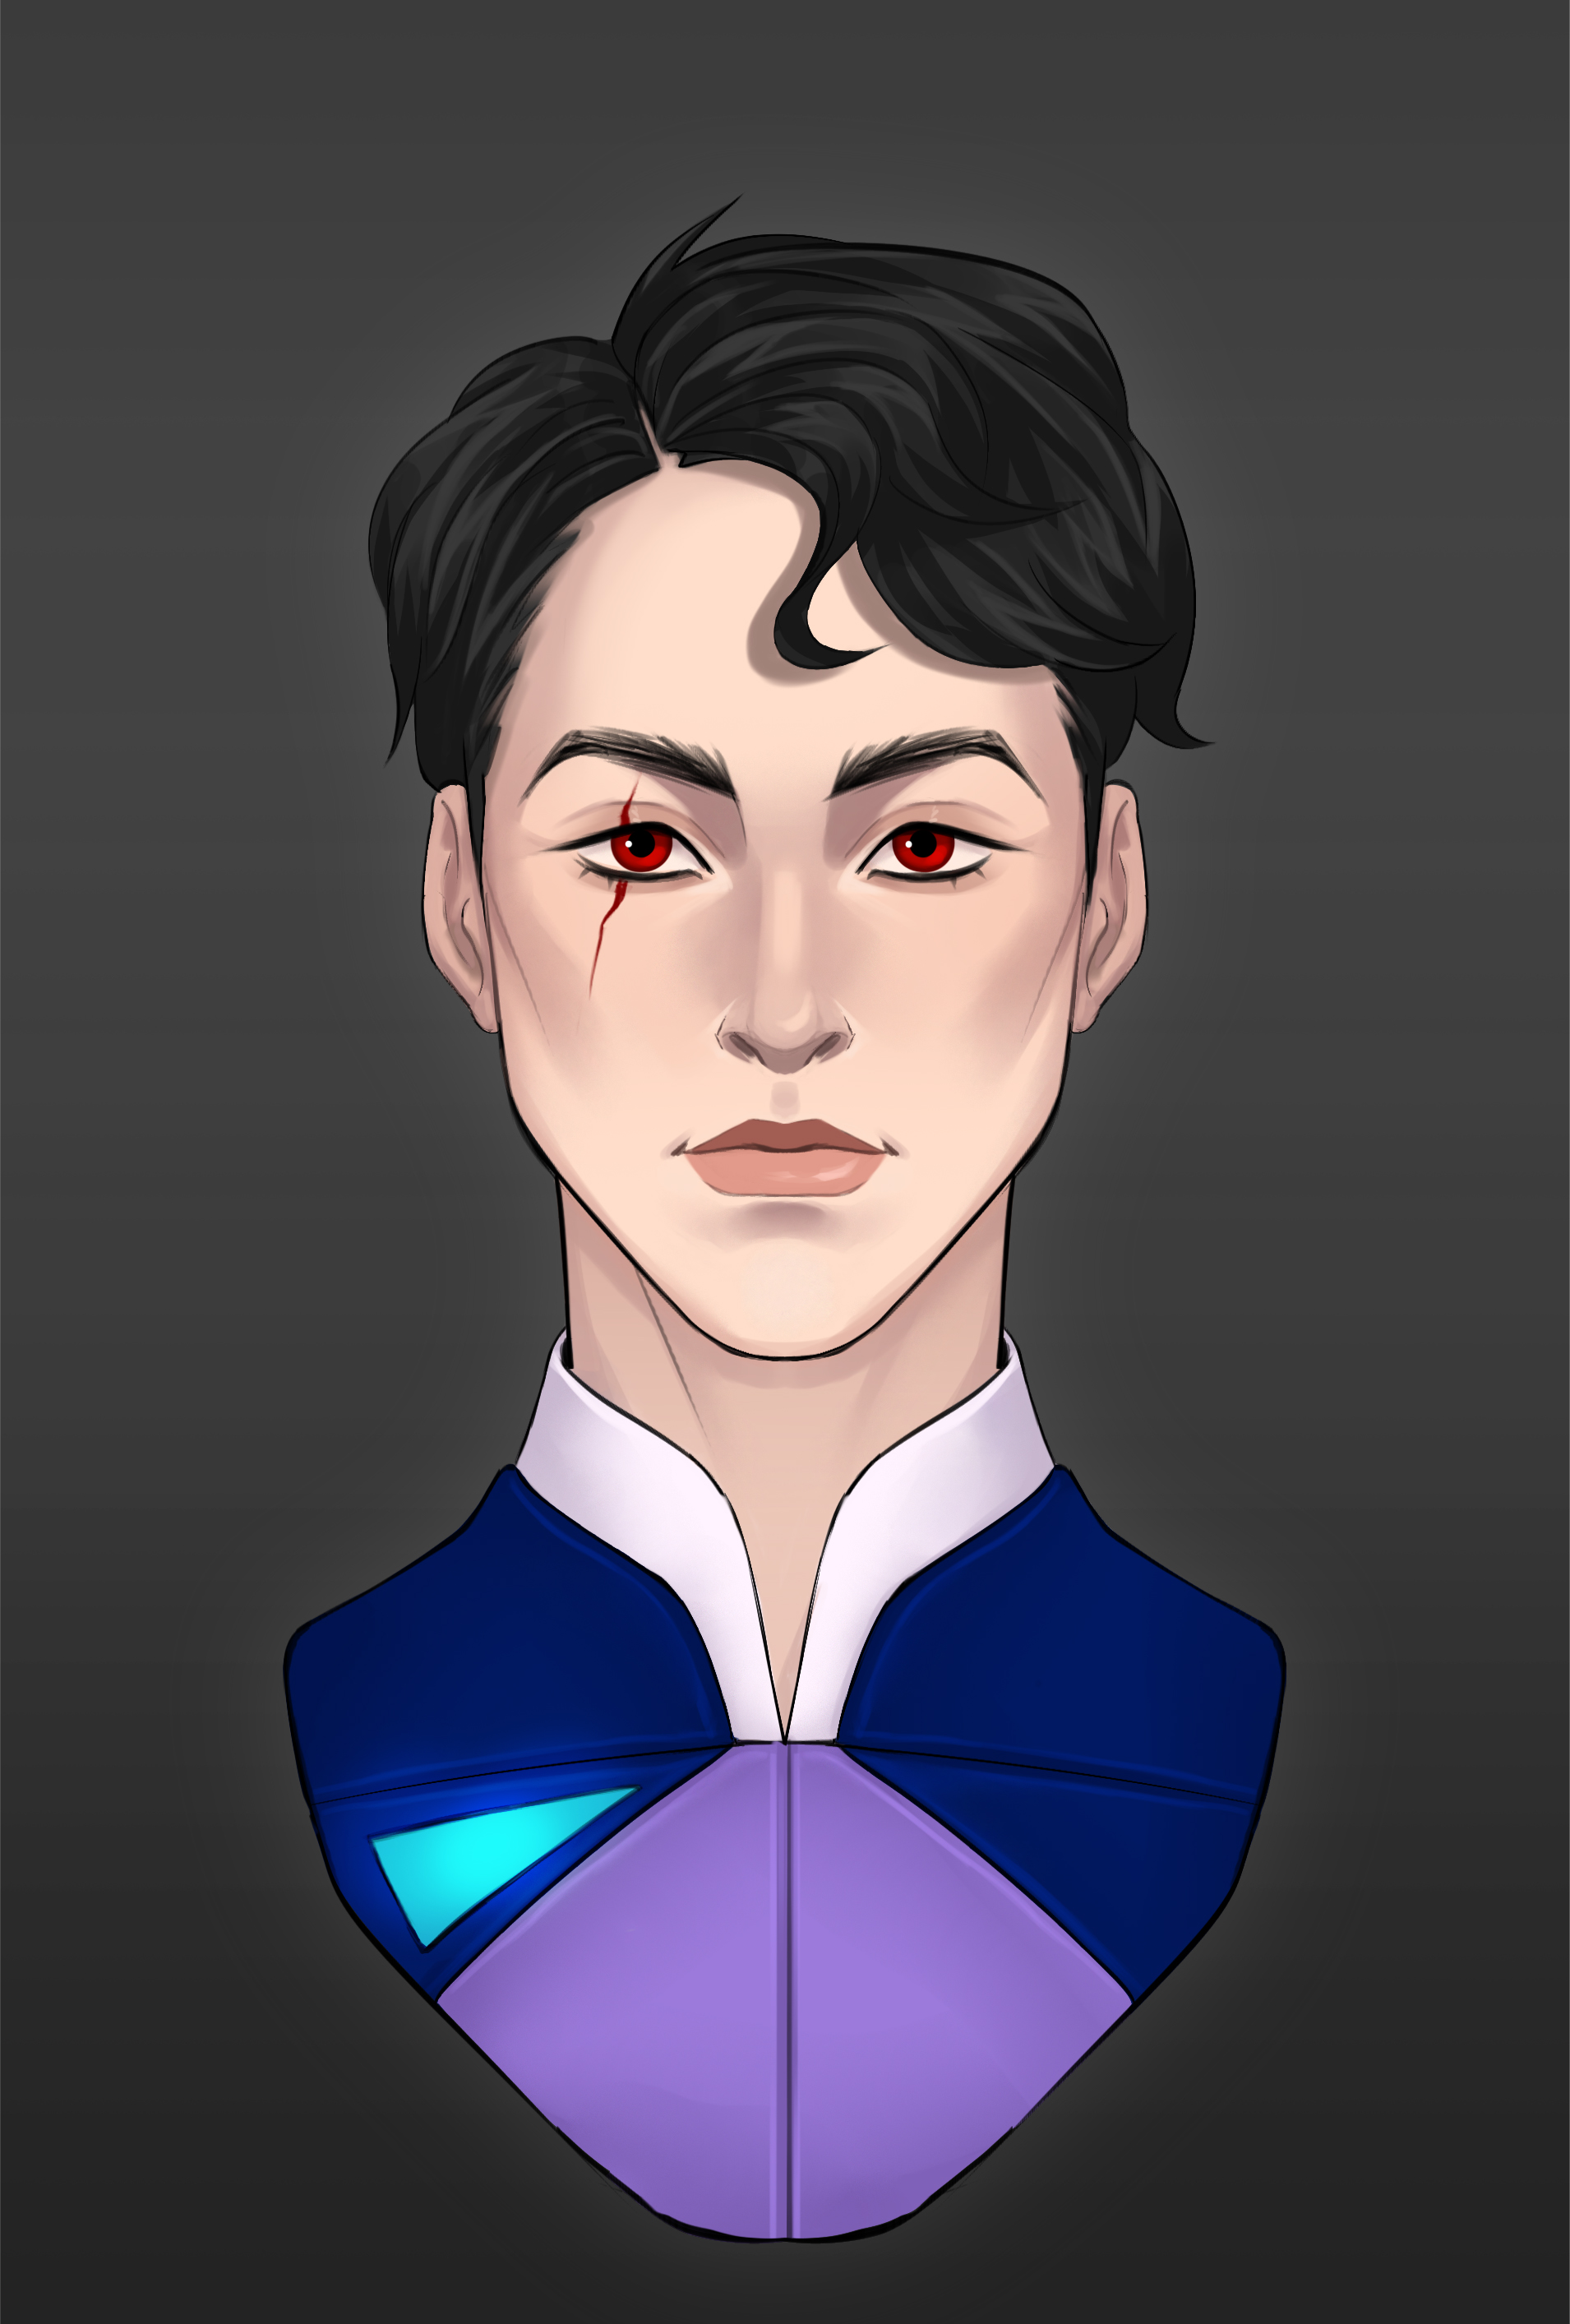 2024 Tanaka Yoshiro headshot by moshpit commissioned by Wes